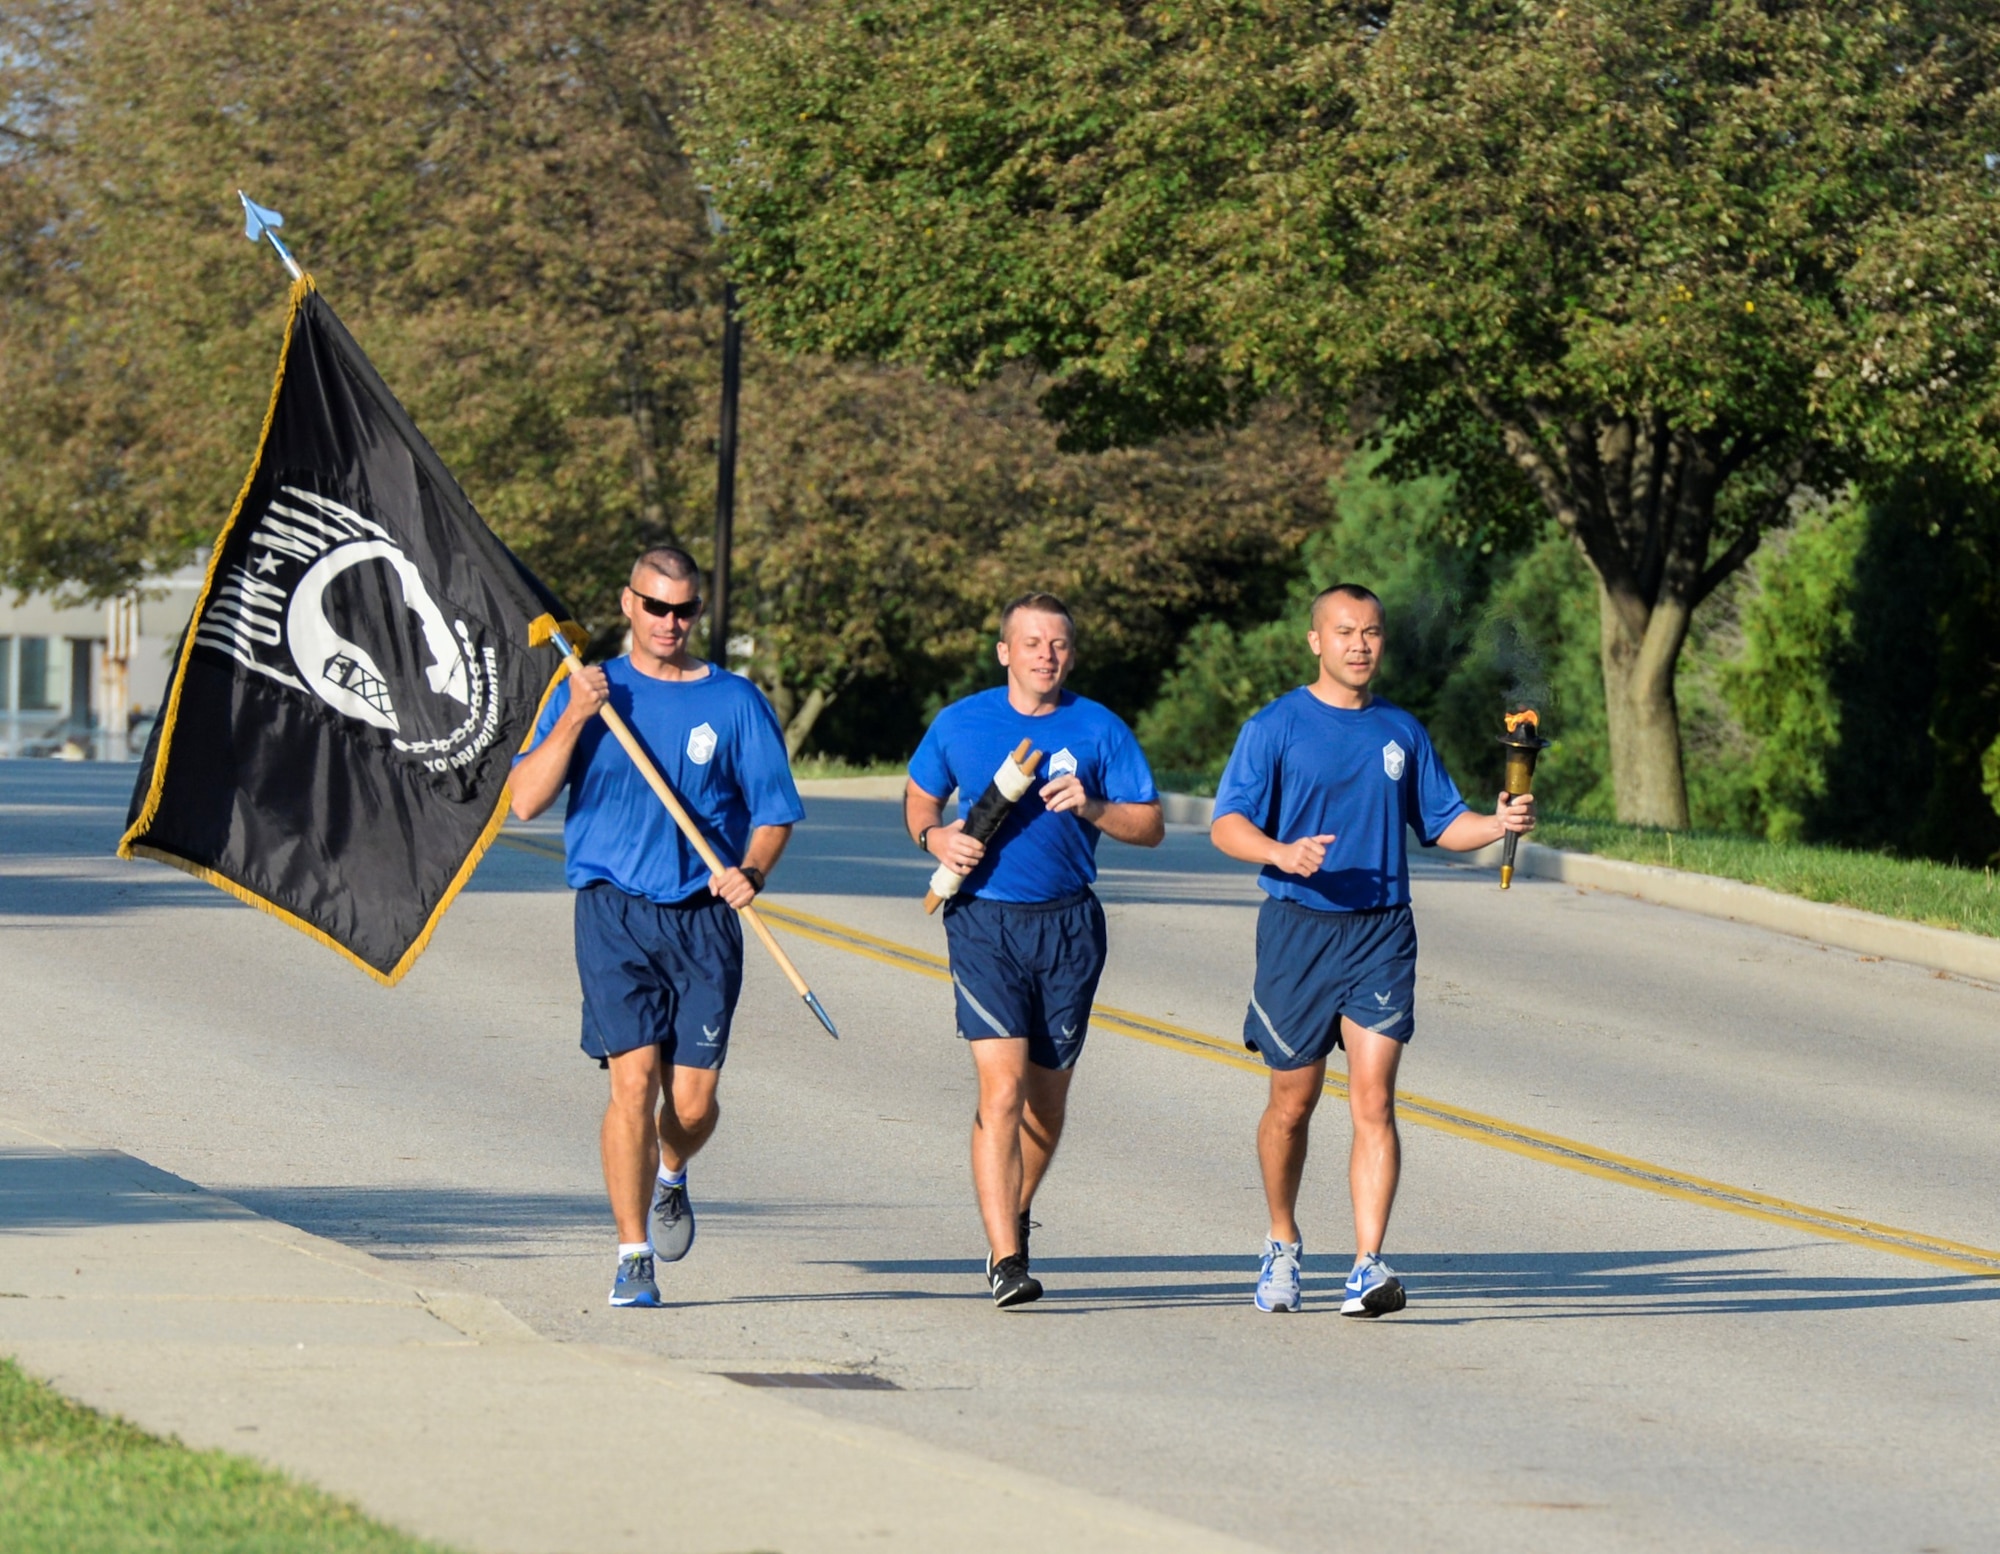 Members of the Wright-Patterson Chiefs Group run the last leg of the POW/MIA 24-hour run and overnight vigil at Wright-Patterson Air Force Base, Ohio, Sept. 21, 2018. The run concluded at the base POW/MIA wreath laying ceremony. (U.S. Air Force photo/Wesley Farnsworth)